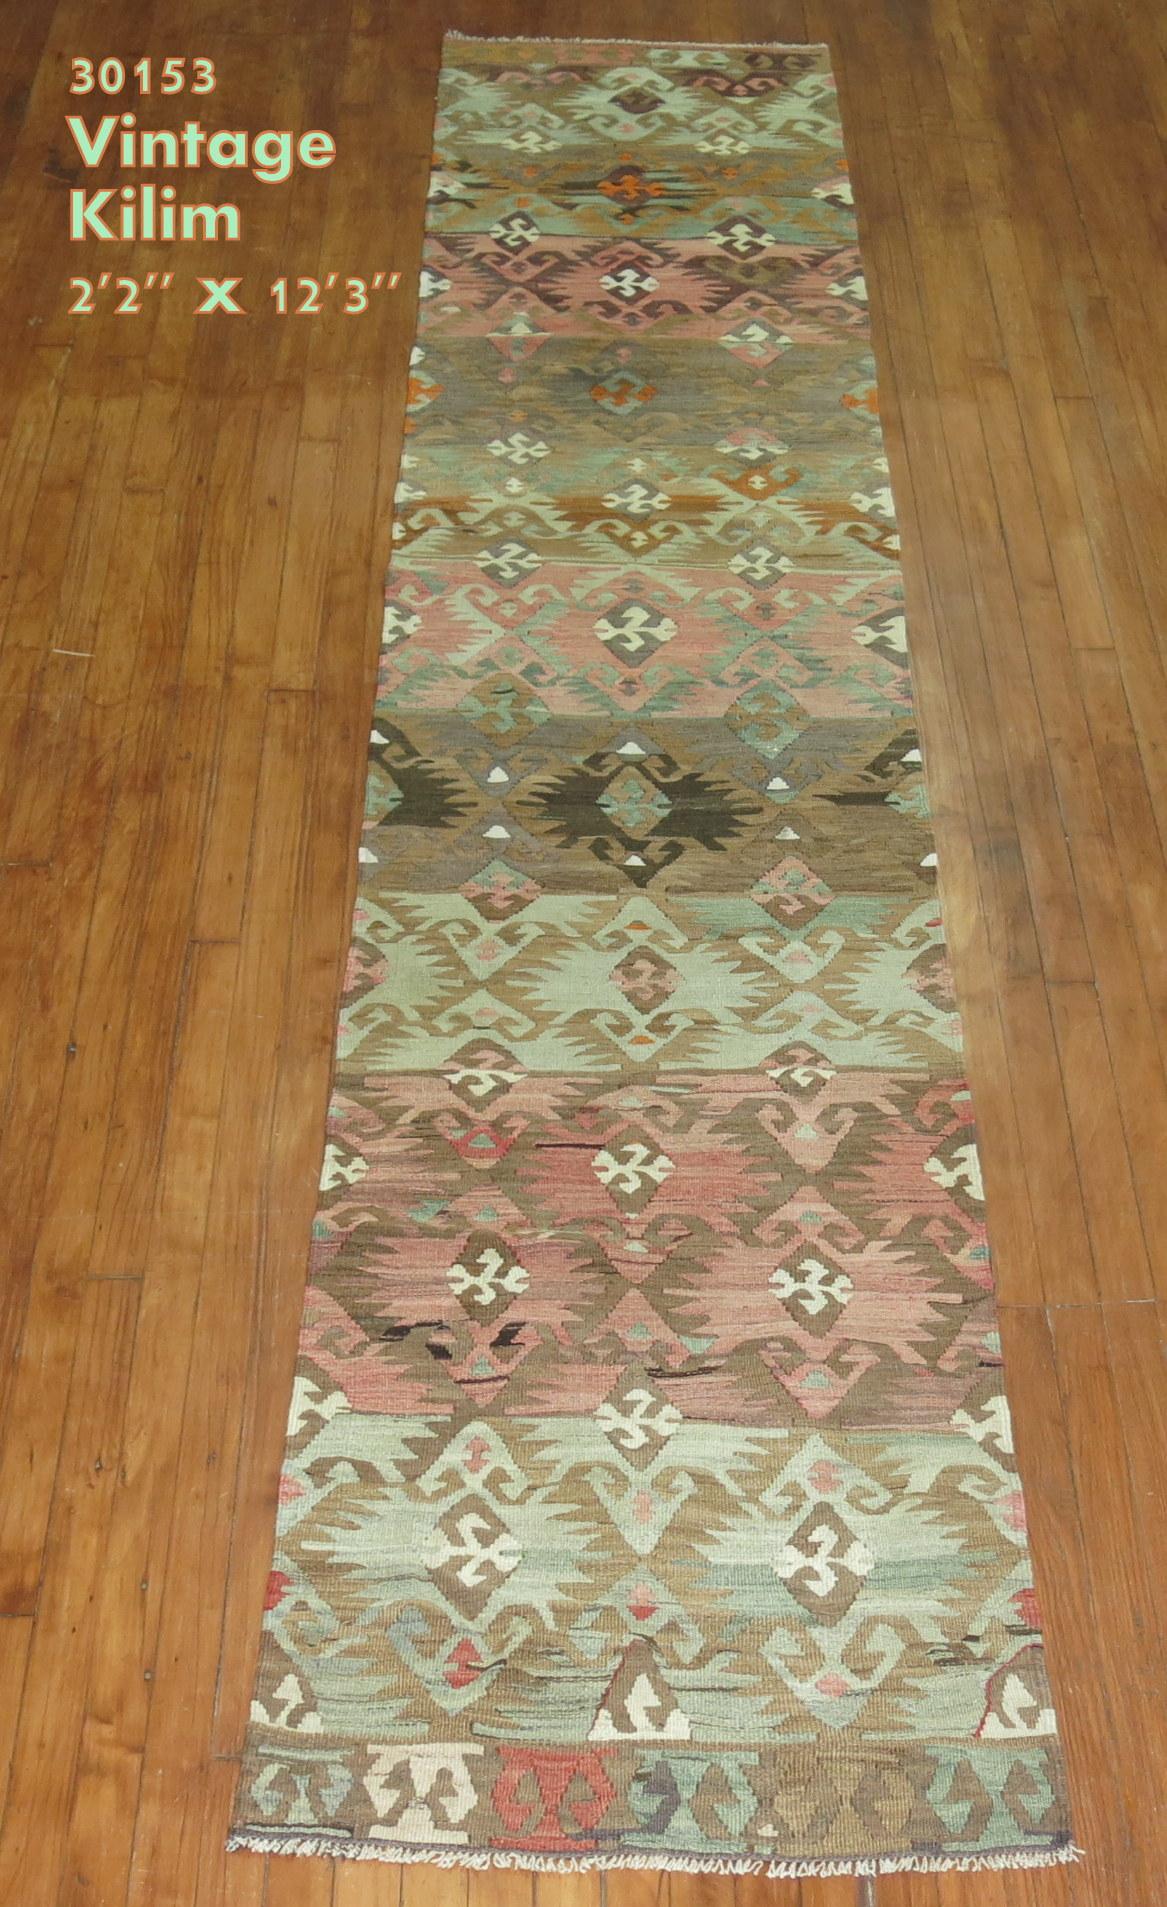 20th century geometric Turkish runner in casual tones in green, pink brown, mid-20th century.

Measures: 2'2